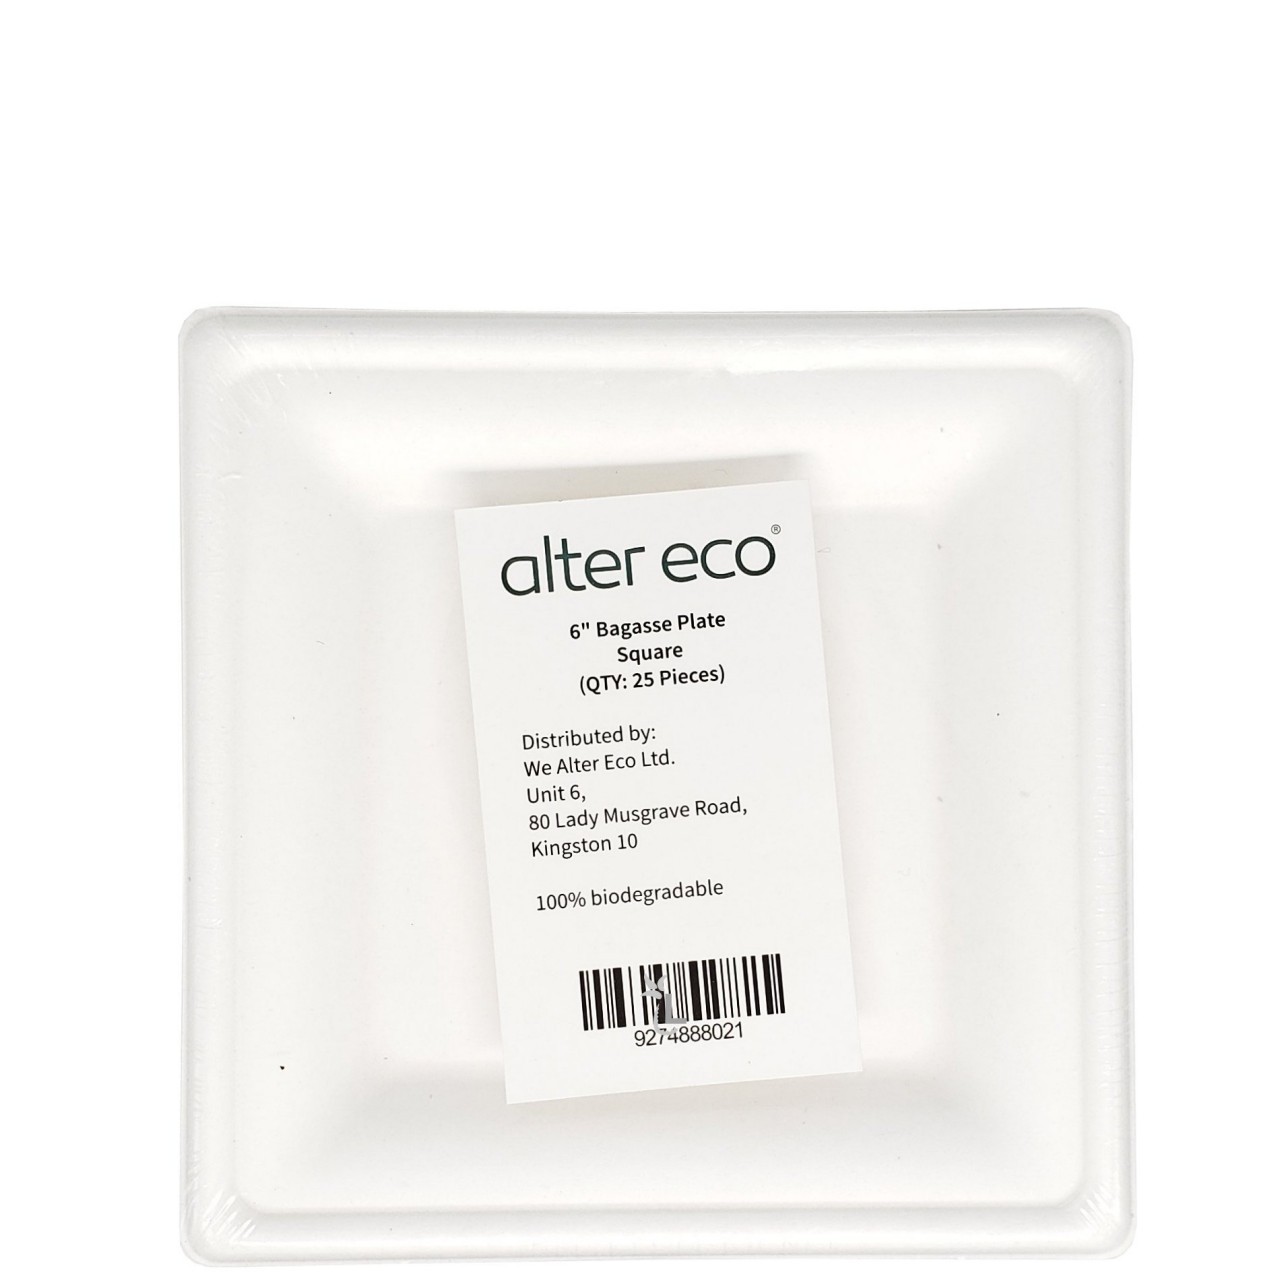 ALTER ECO BAGASSE PLATE SQUARE 25x6in